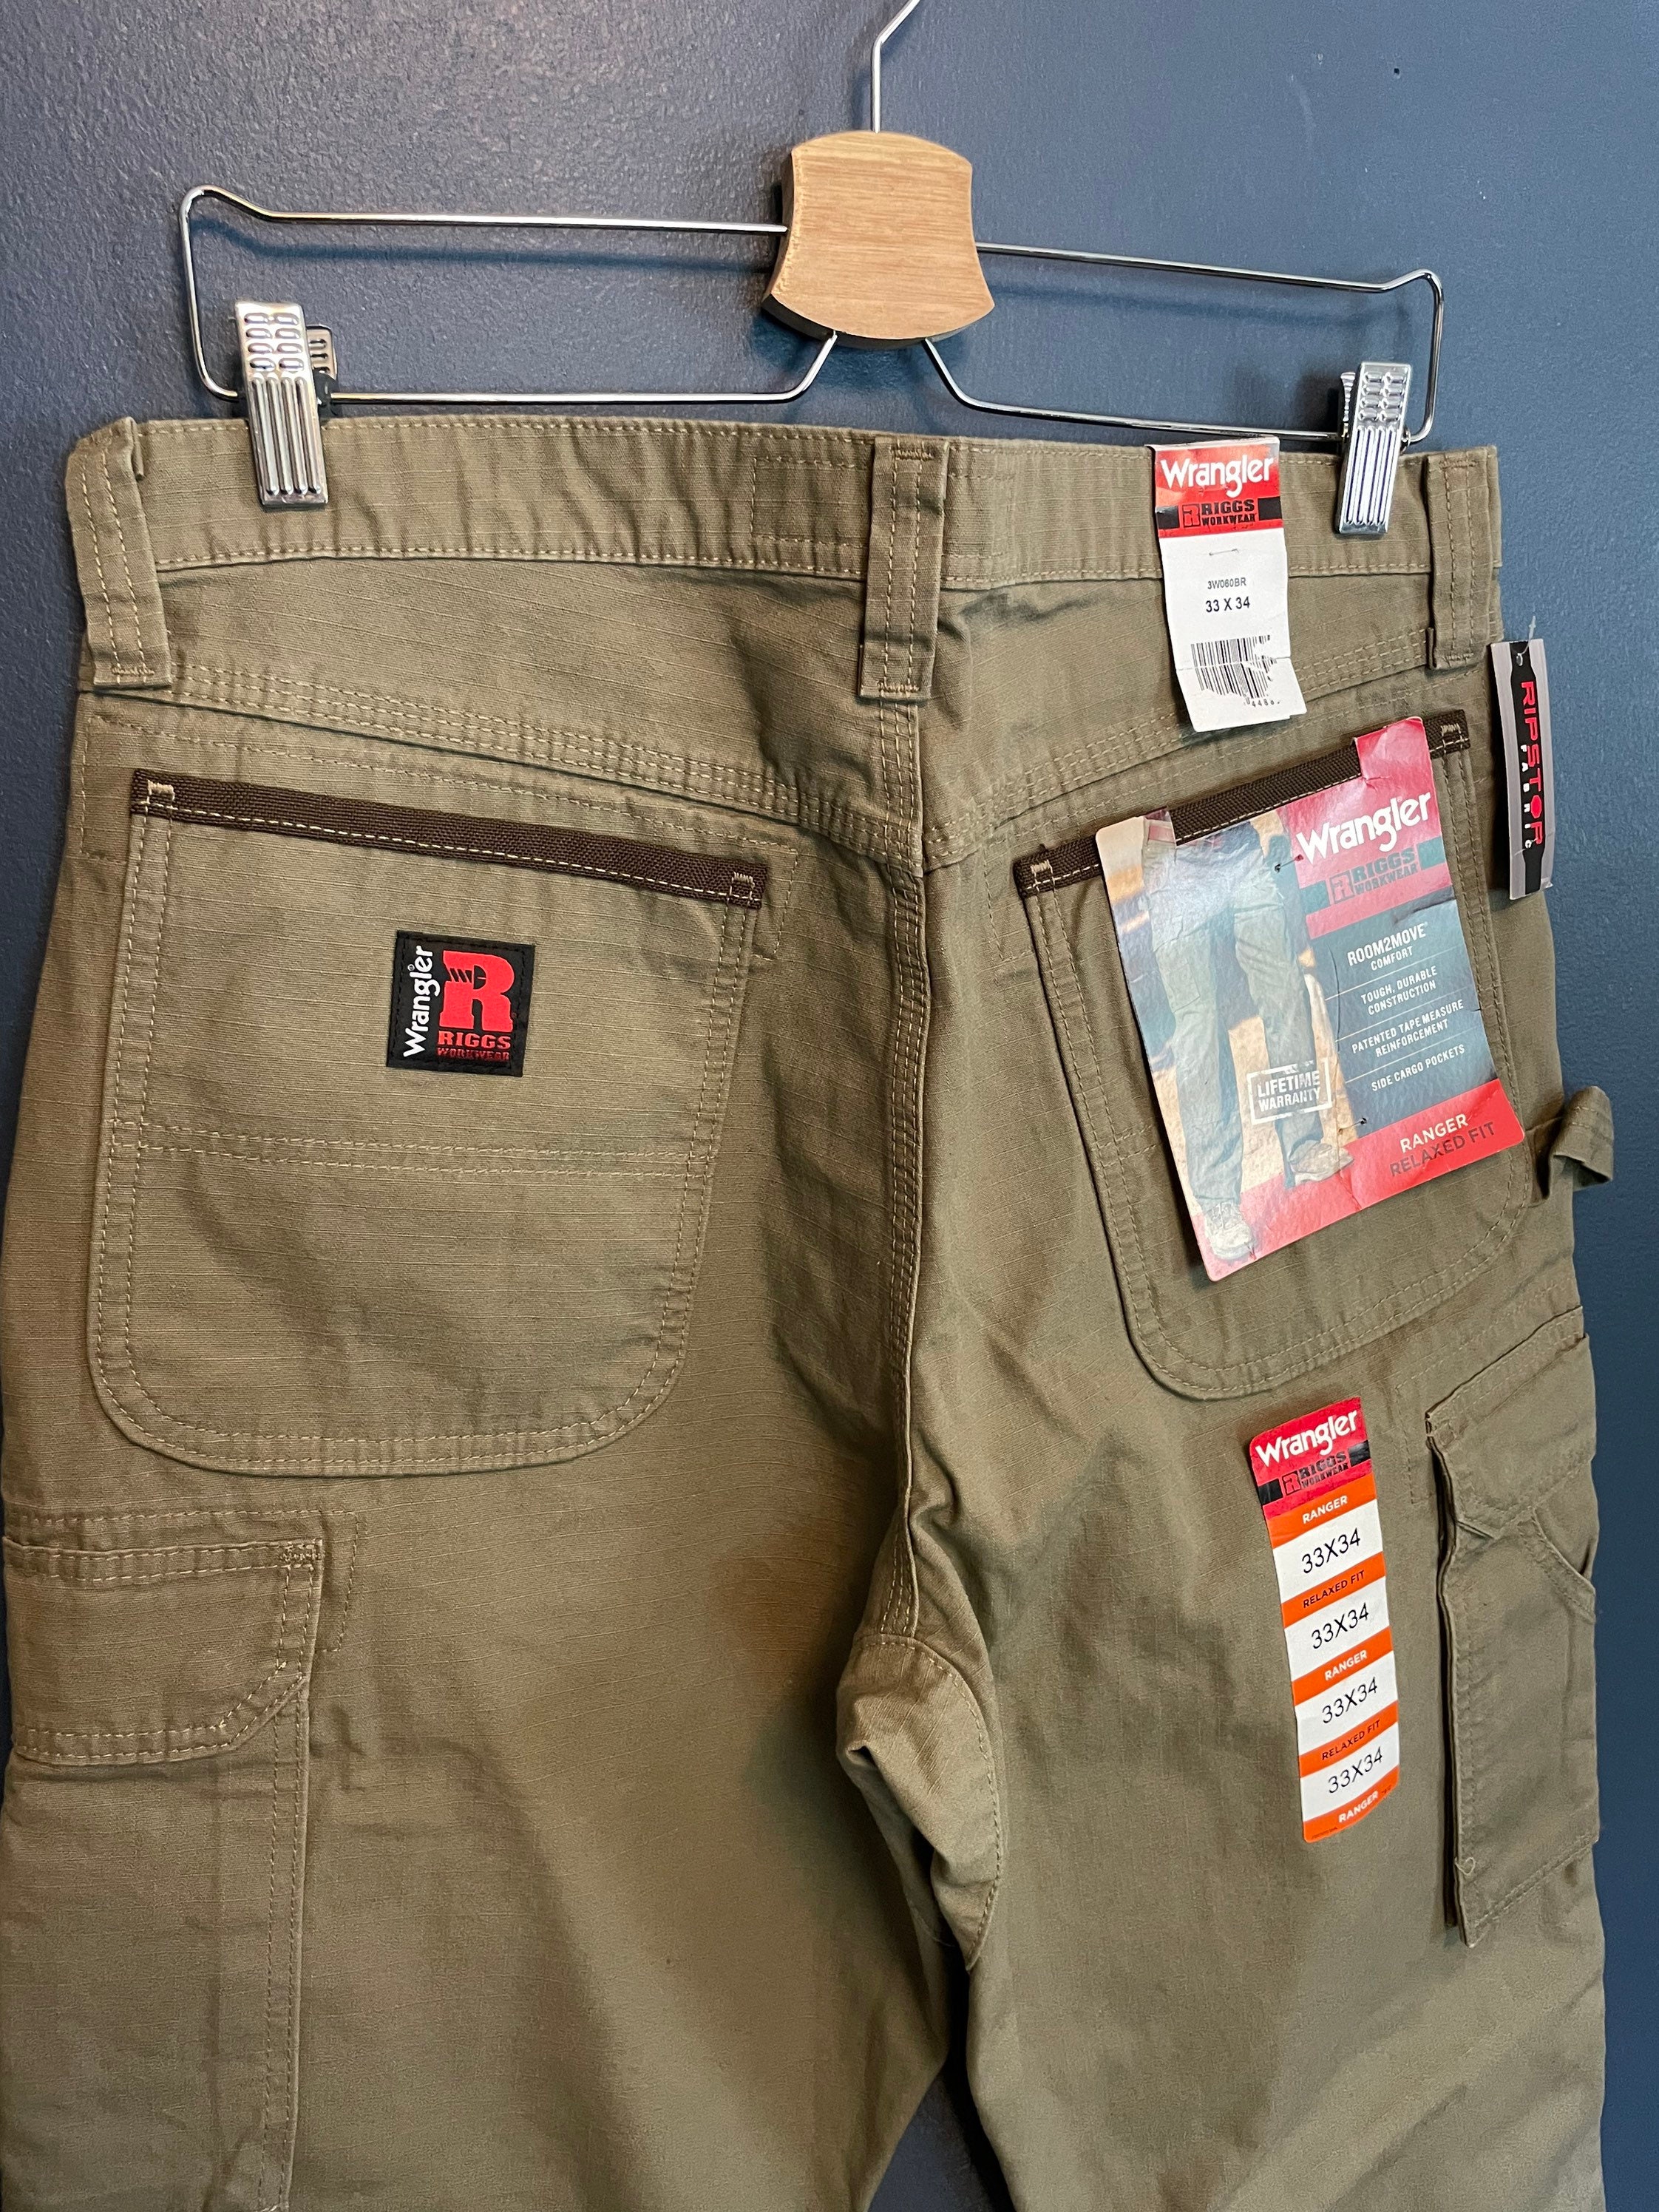 DSWT Y2K Wrangler Riggs Workwear Ripstop Fabric Cargo Pants - Etsy